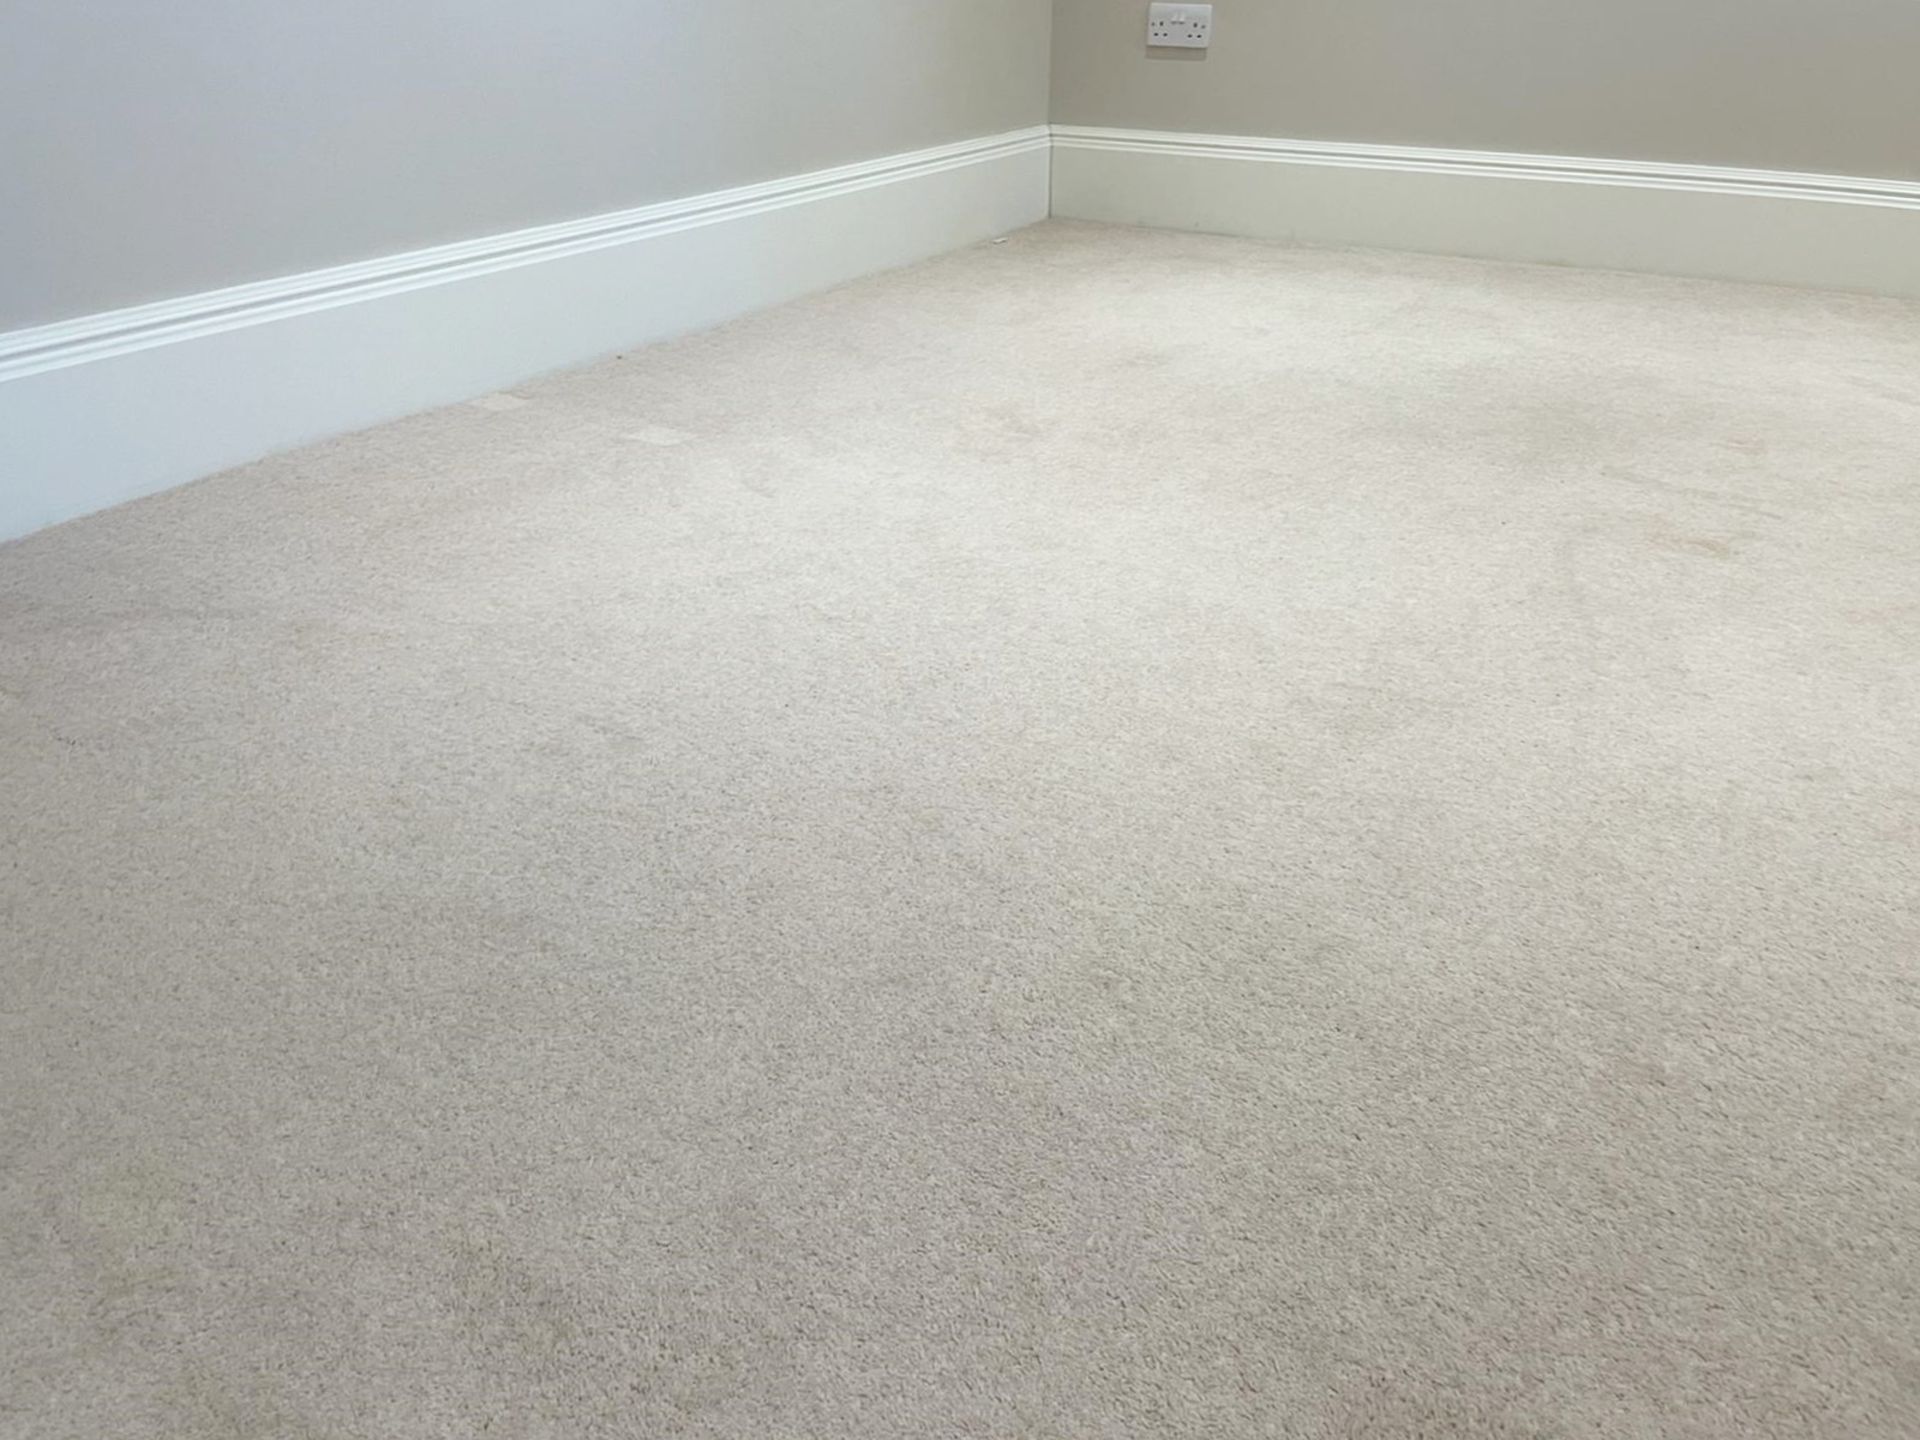 1 x Premium Wool Downstairs Carpet in a Neutral Tone + Underlay - NO VAT ON THE HAMMER - Image 3 of 7